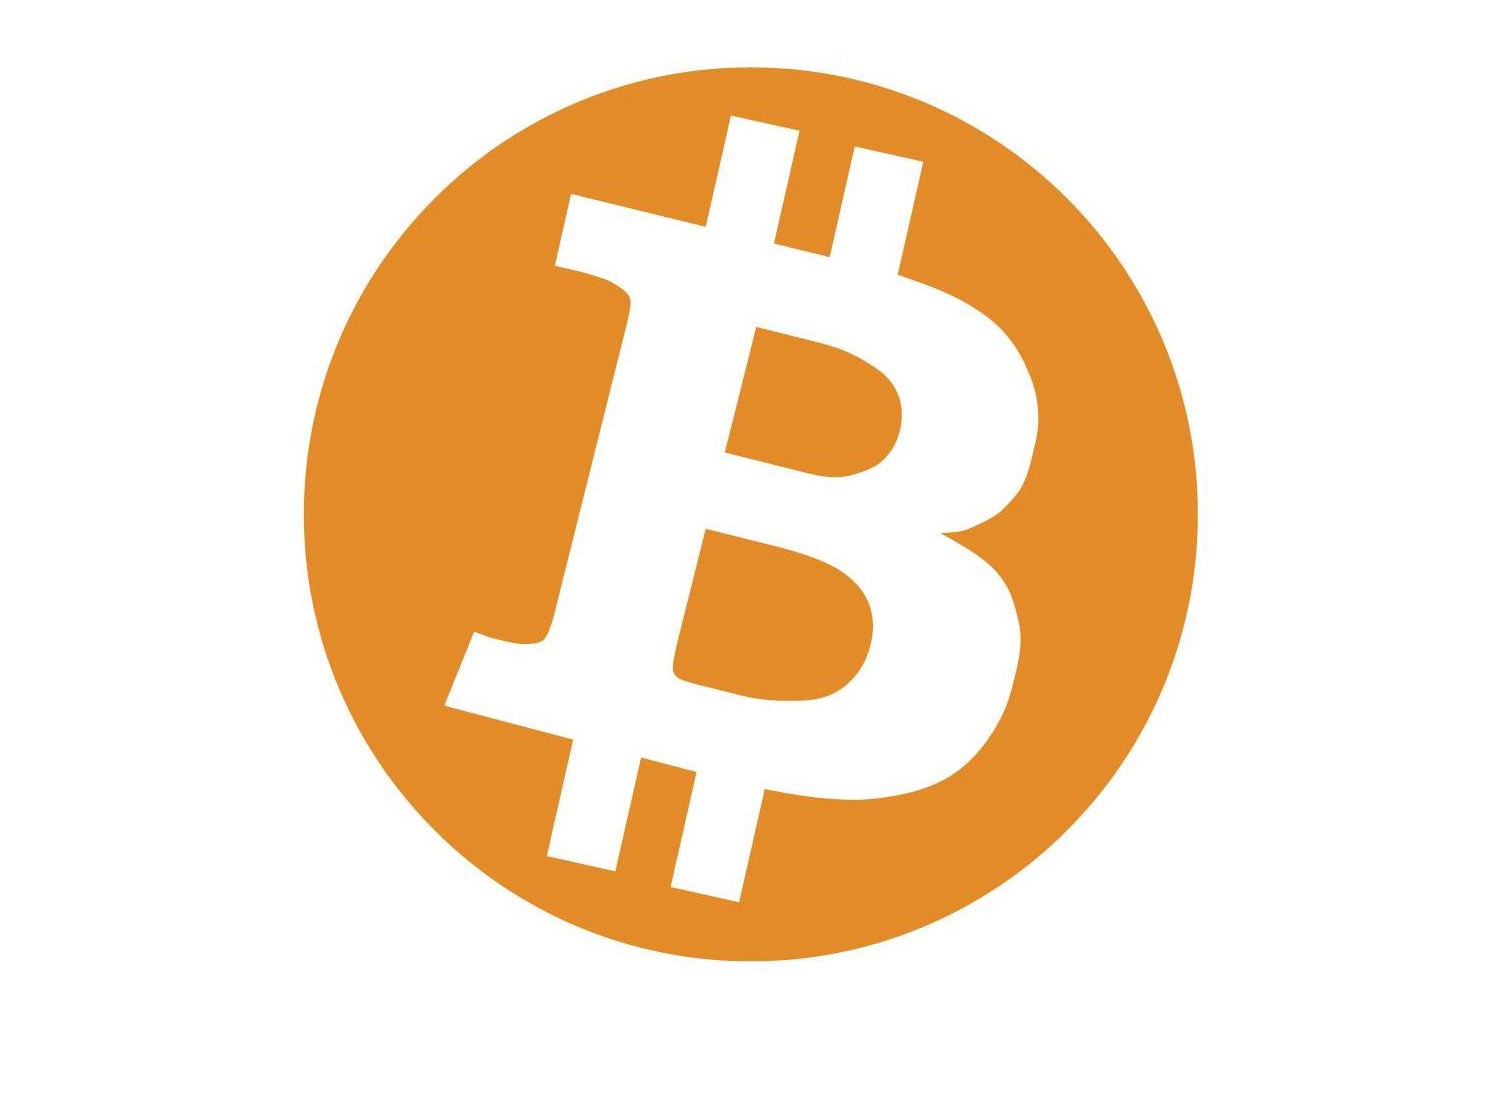 The Bitcoin Logo - orange with B sign with lines through it